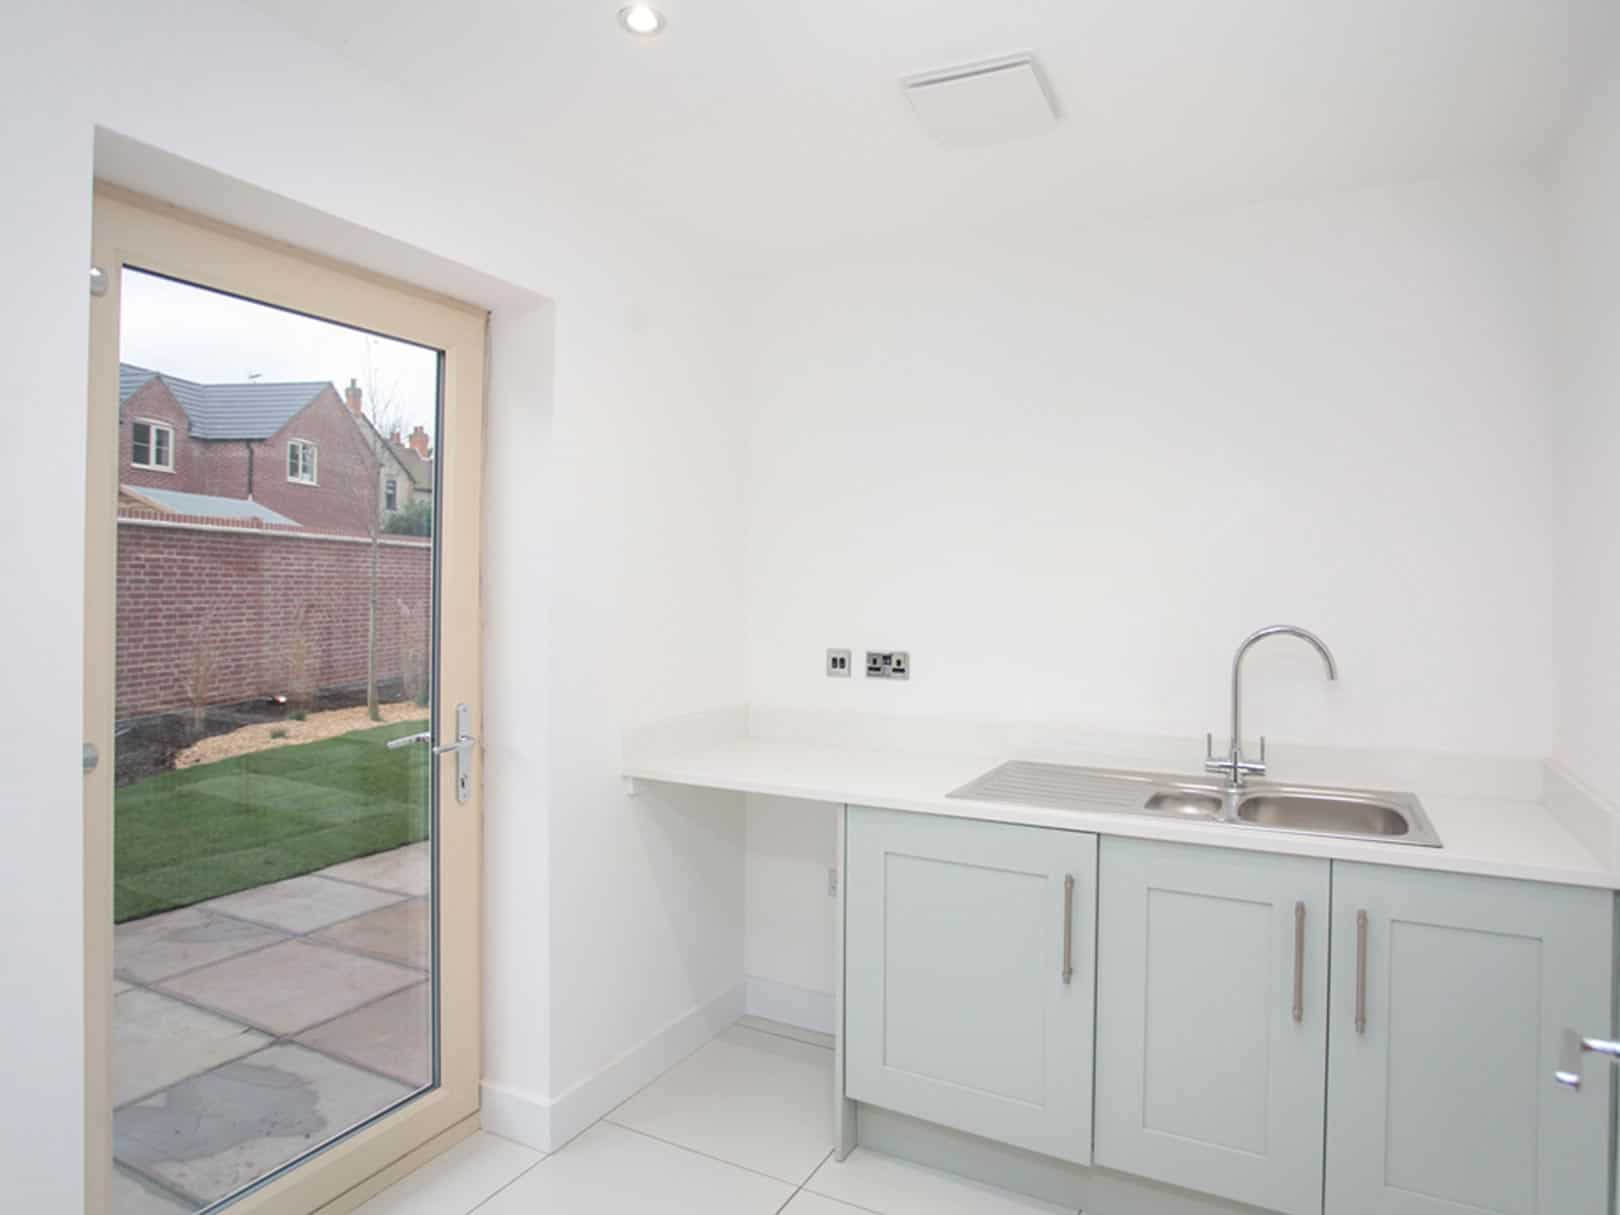 utility-space-detached-property-north-kilworth-swan-homes